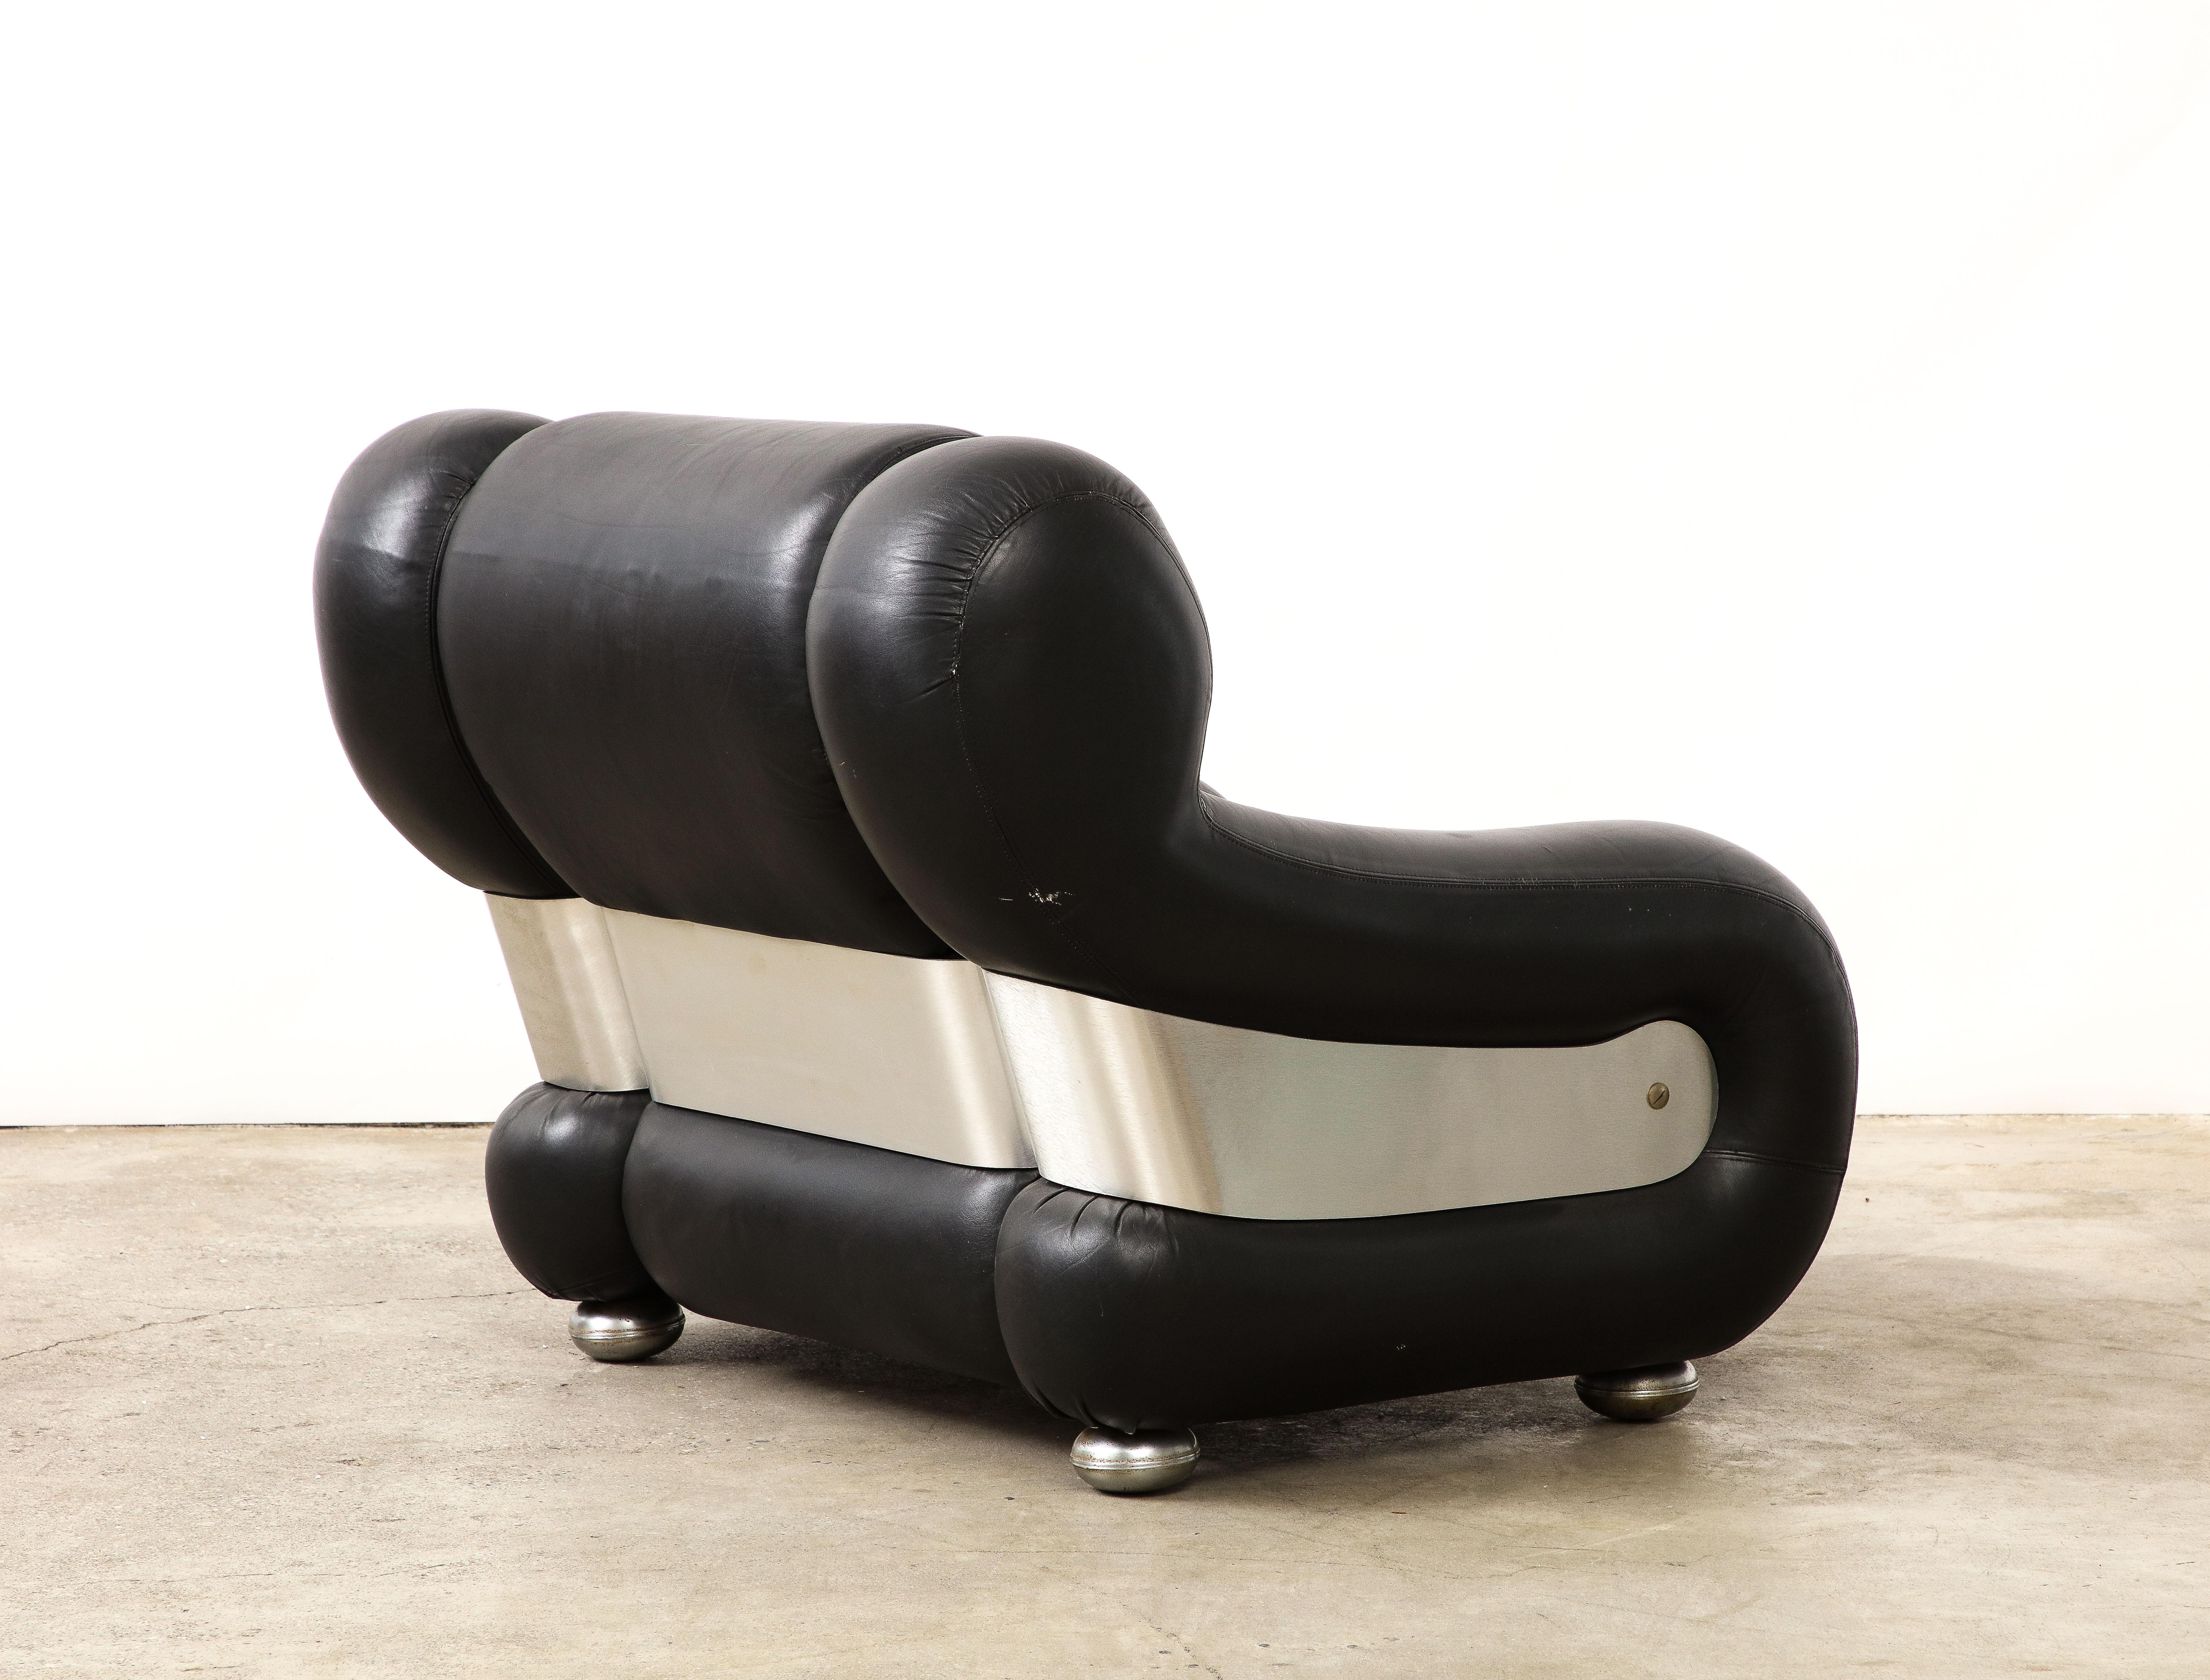 Armchair in the Manner of Adriano Piazzesi, Italy, c. 1970 For Sale 4